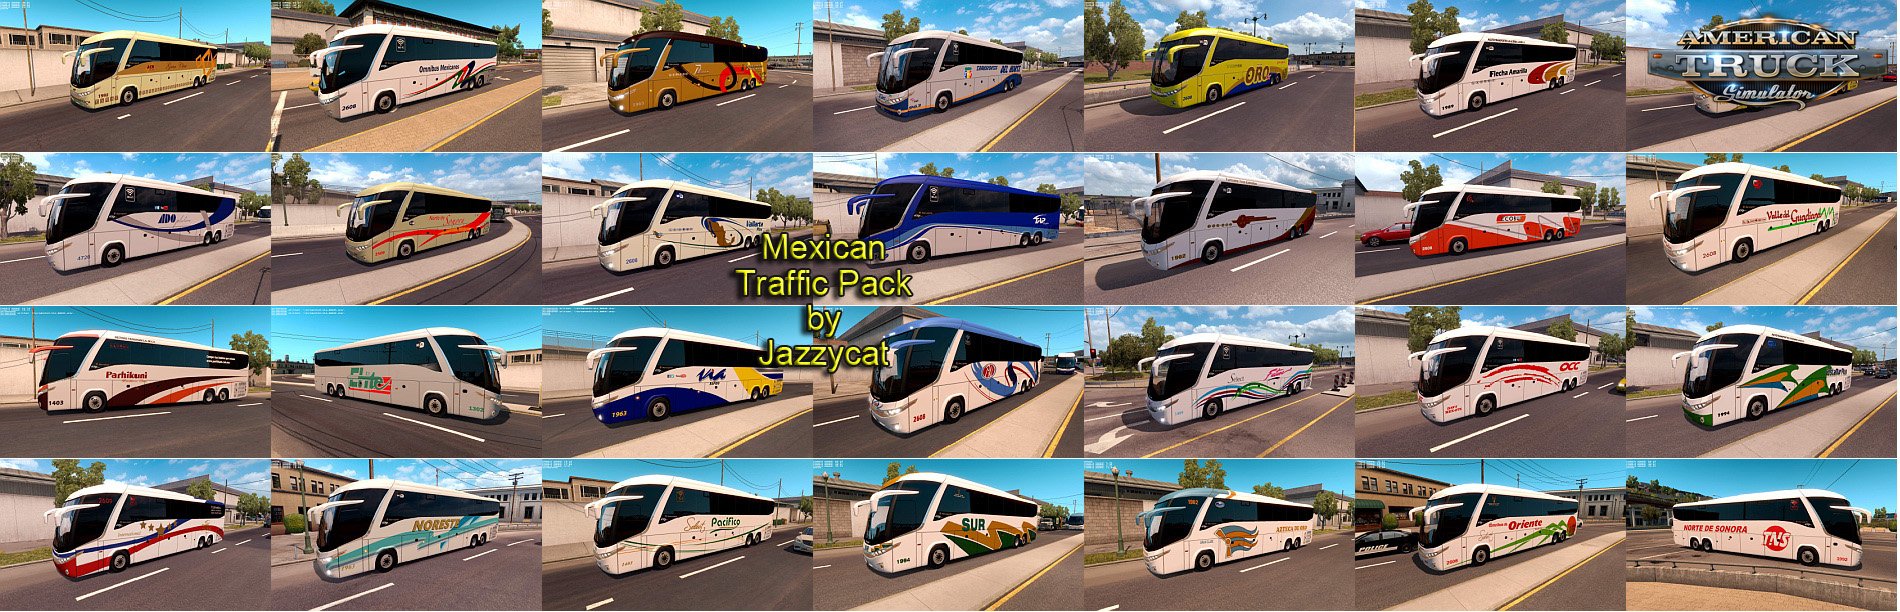 Mexican Traffic Pack v1.6 by Jazzycat